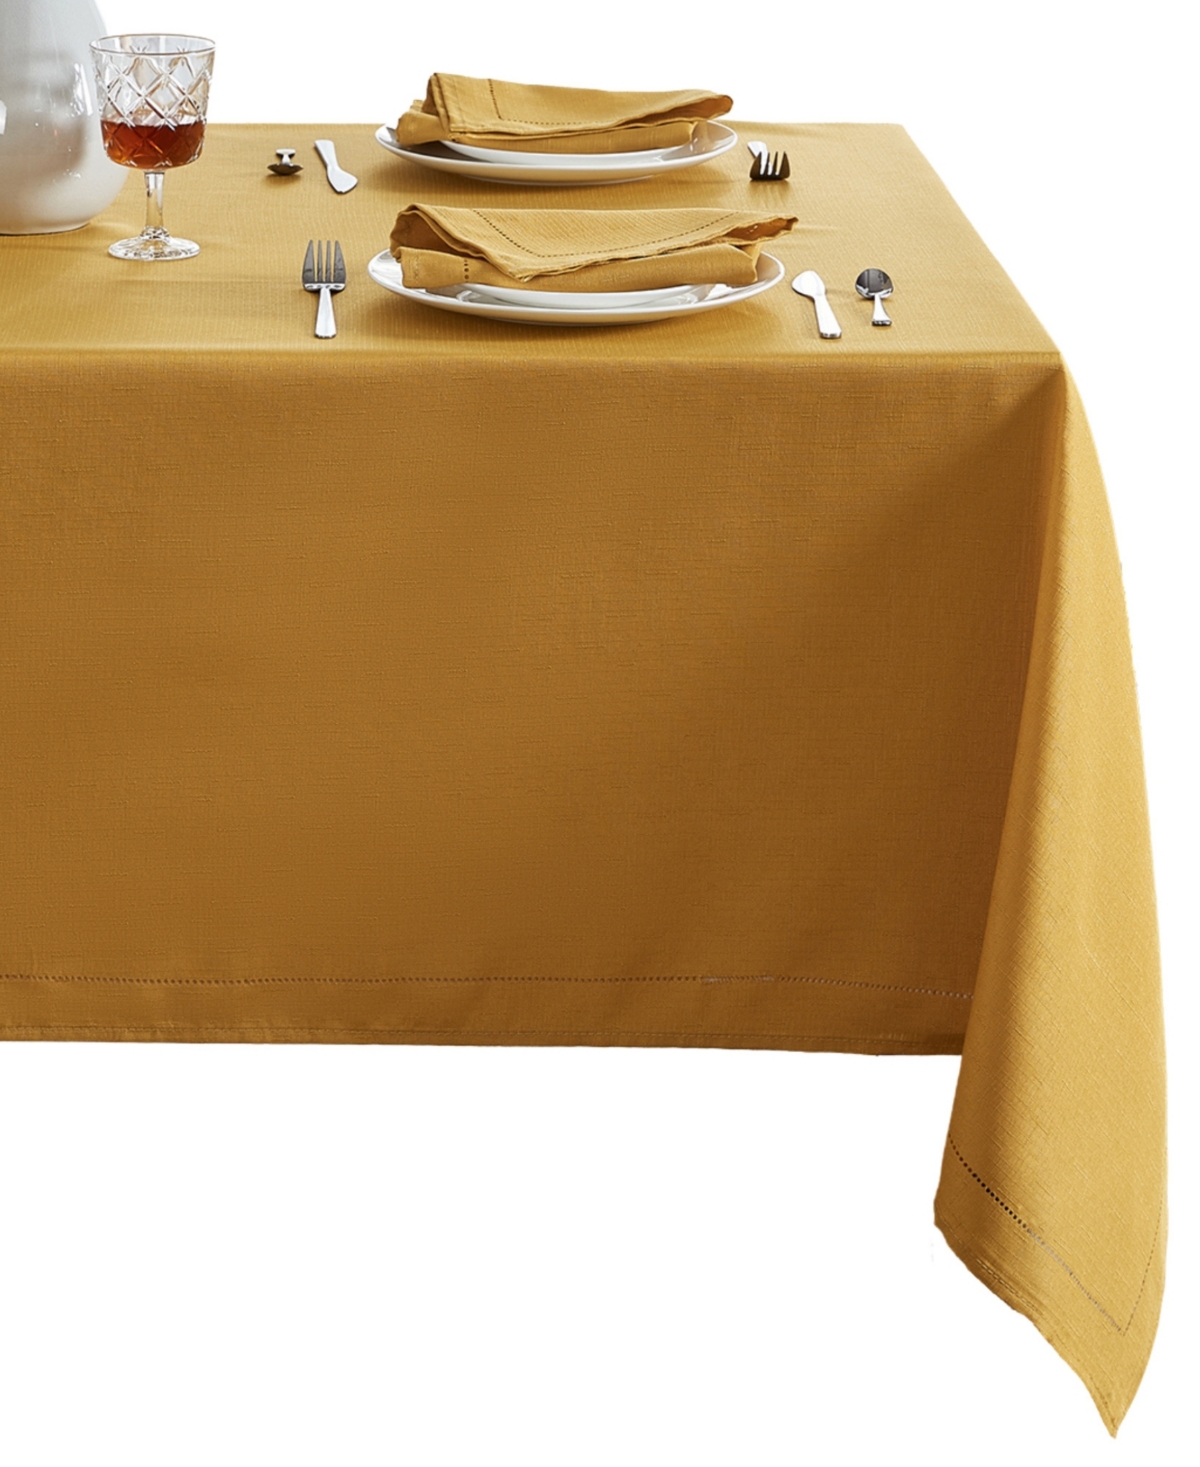 Elrene Alison Eyelet Punched Border Fabric Tablecloth, 60" X 84" In Golden Yellow